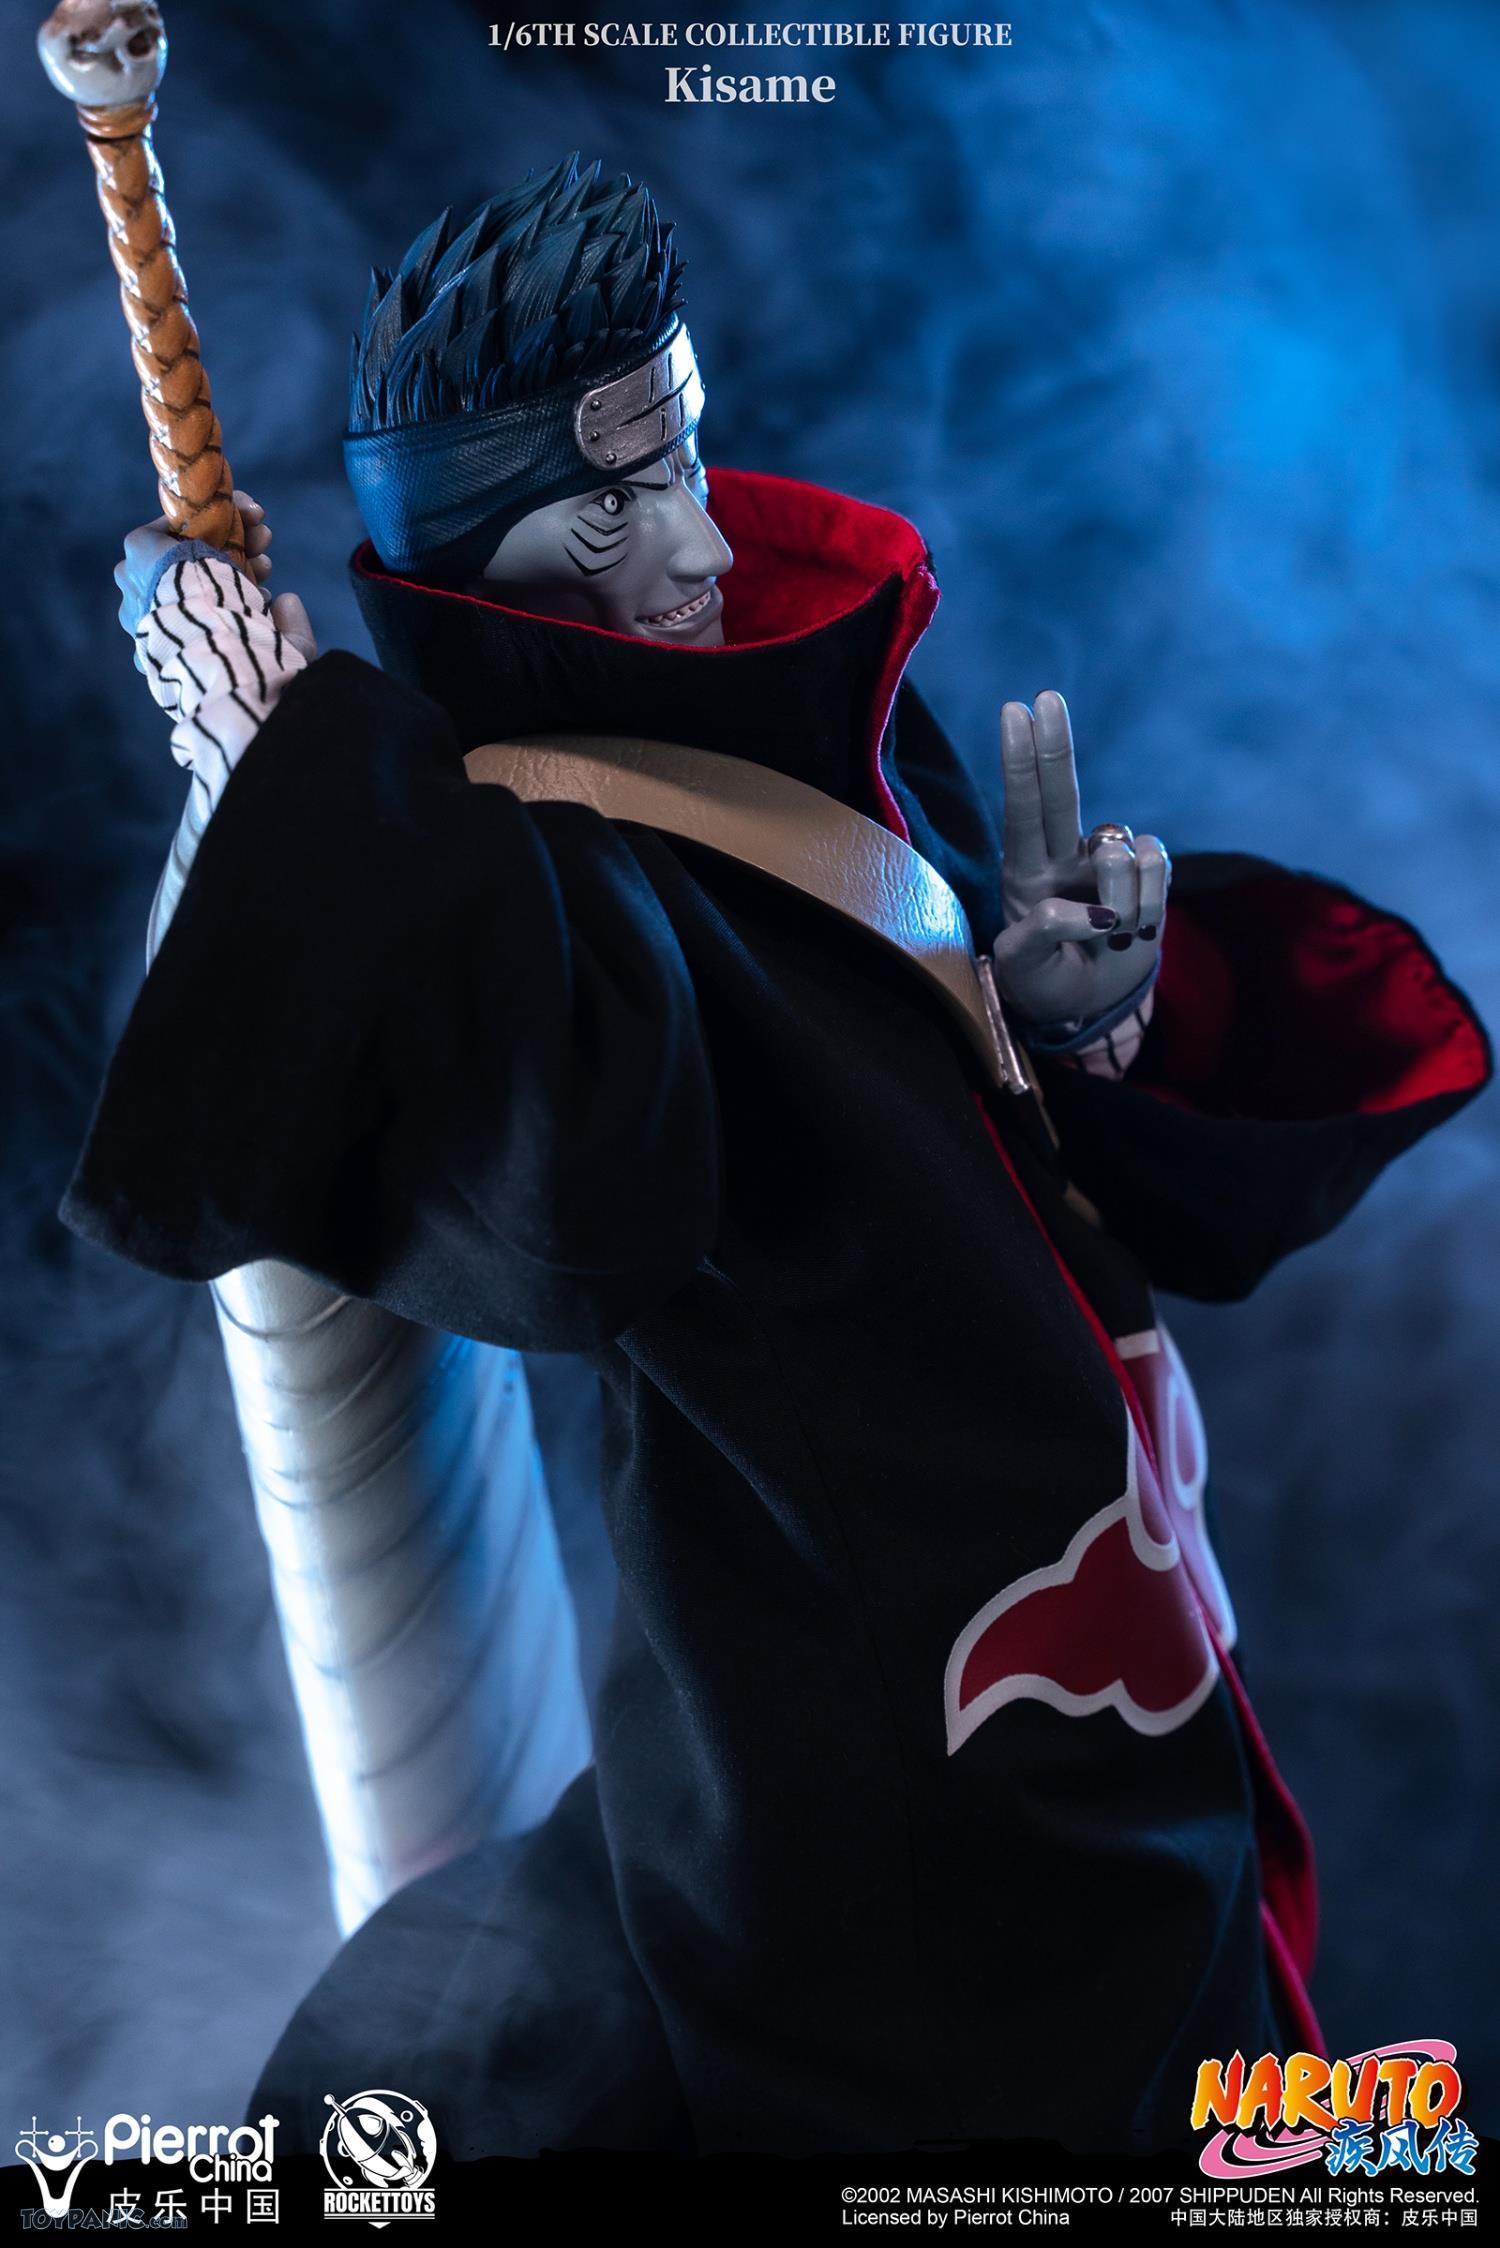 fantasy - NEW PRODUCT: Rocket Toys ROC-007 1/6 Scale Kisame 221202460436PM_37297